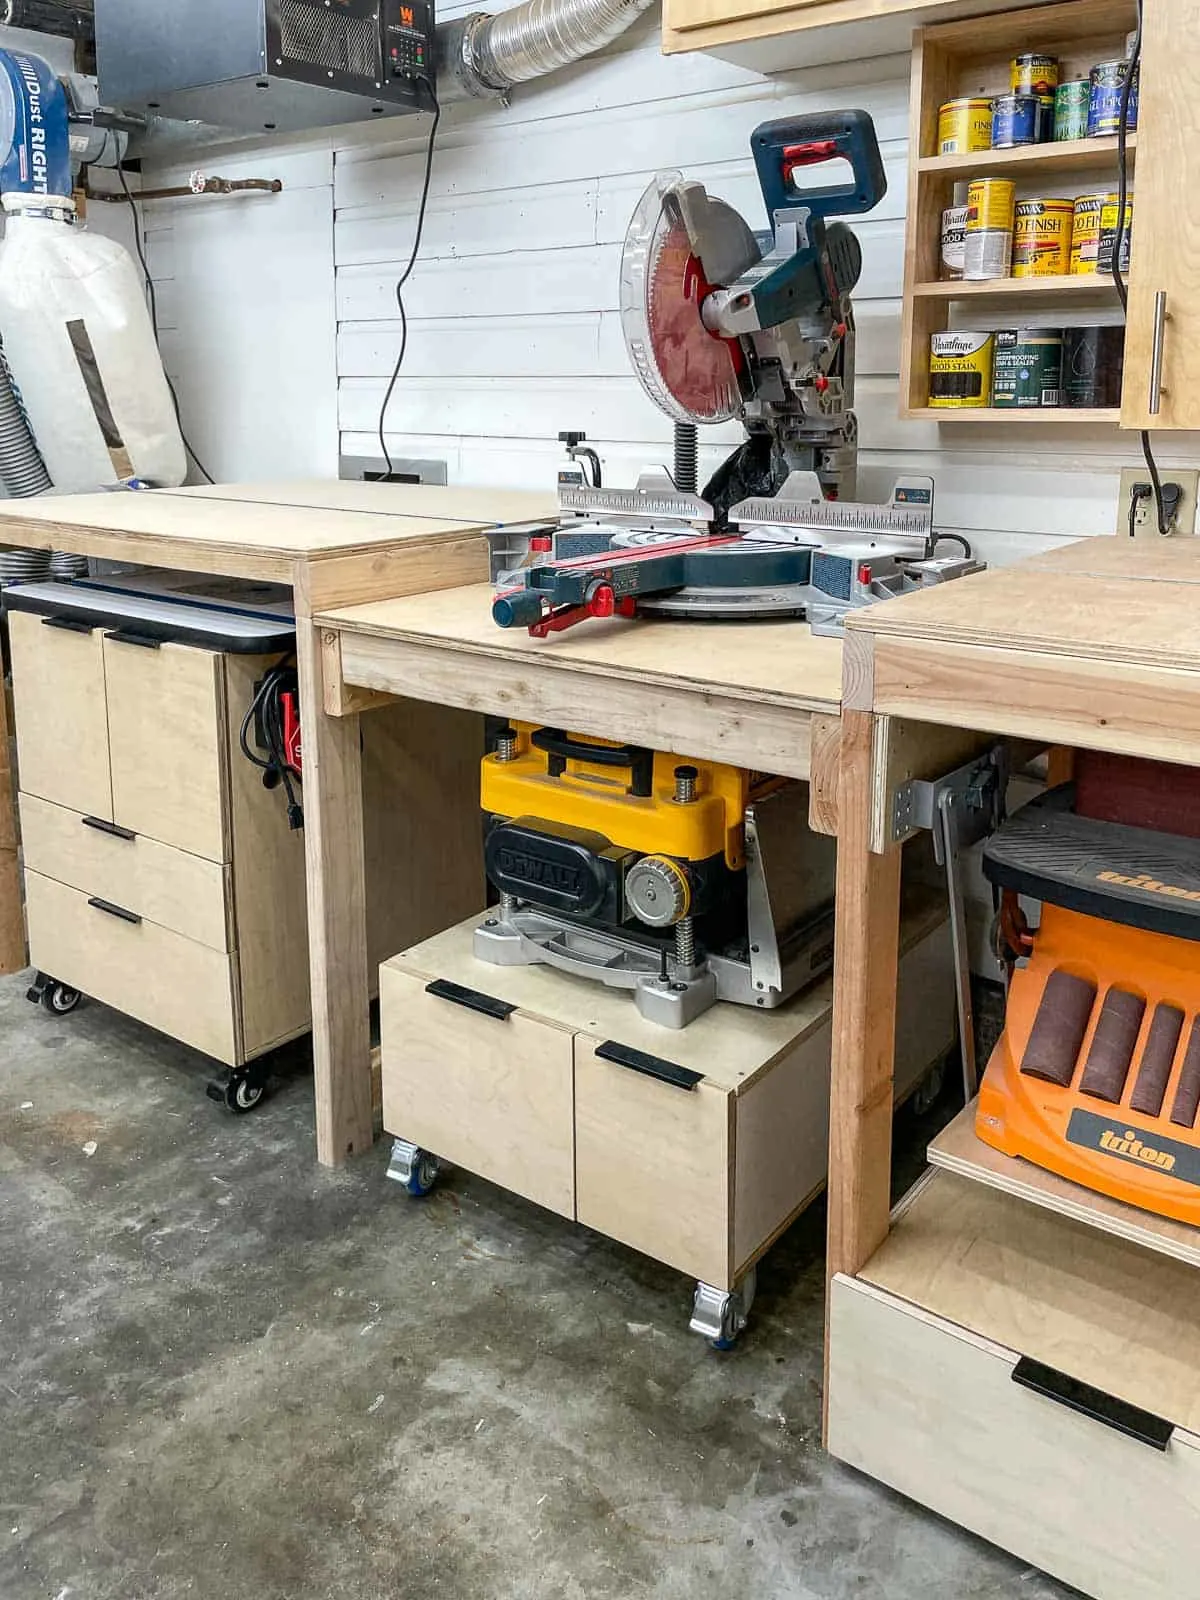 Exploring Routers and Router Tables - Woodworking, Blog